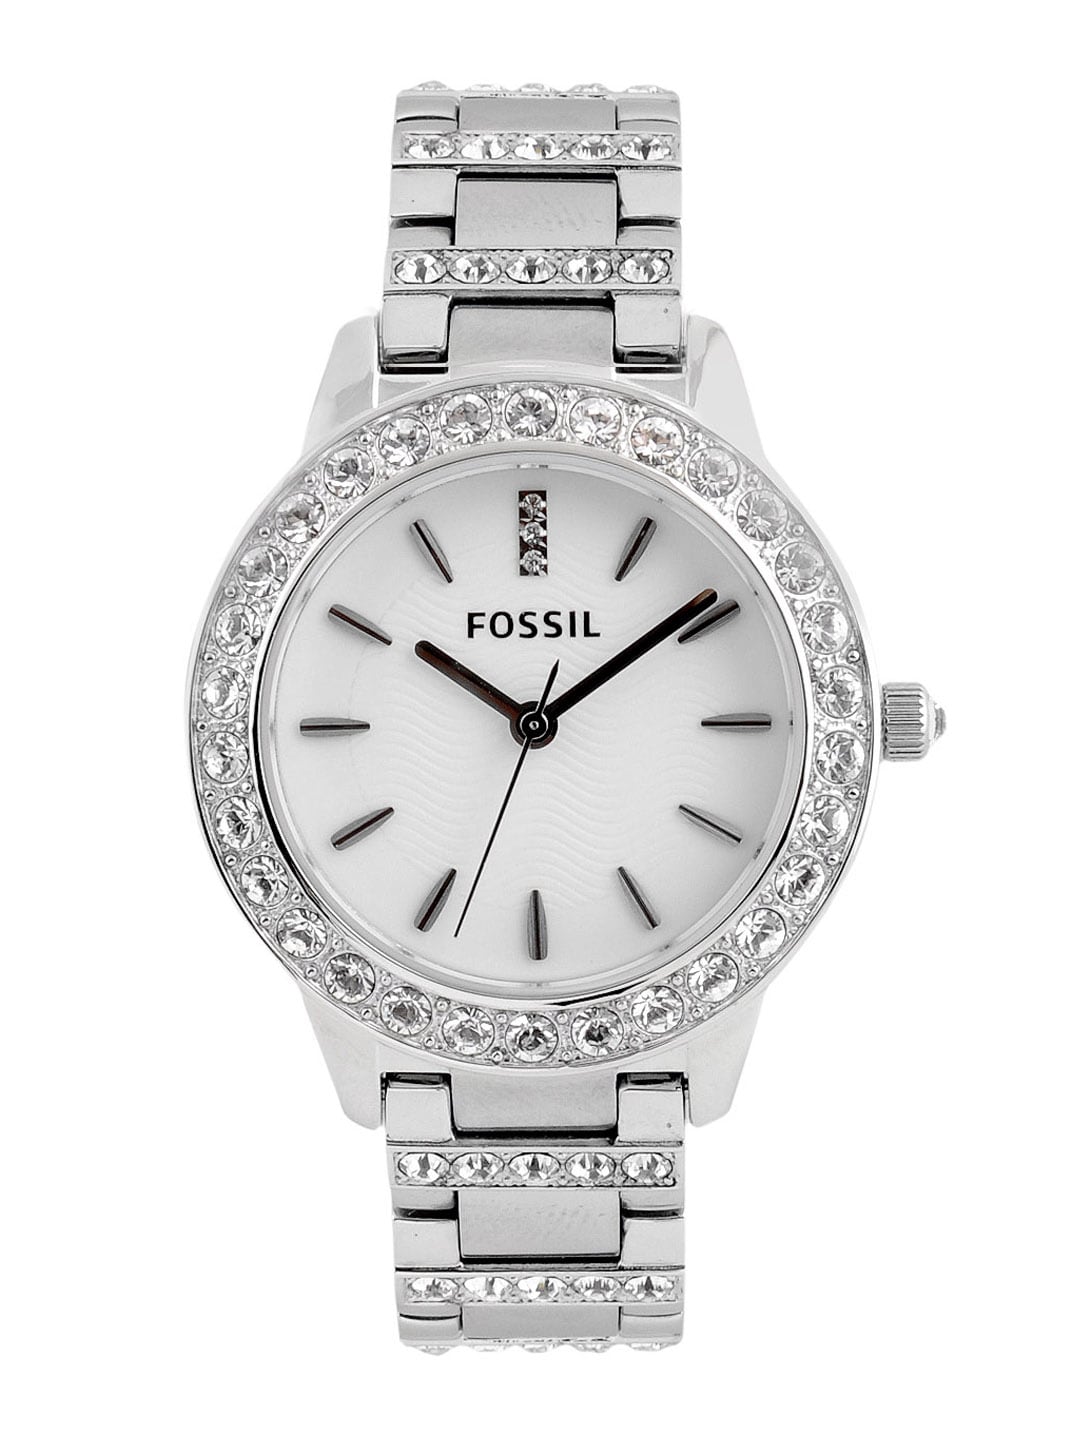 Fossil Women White Dial Watch